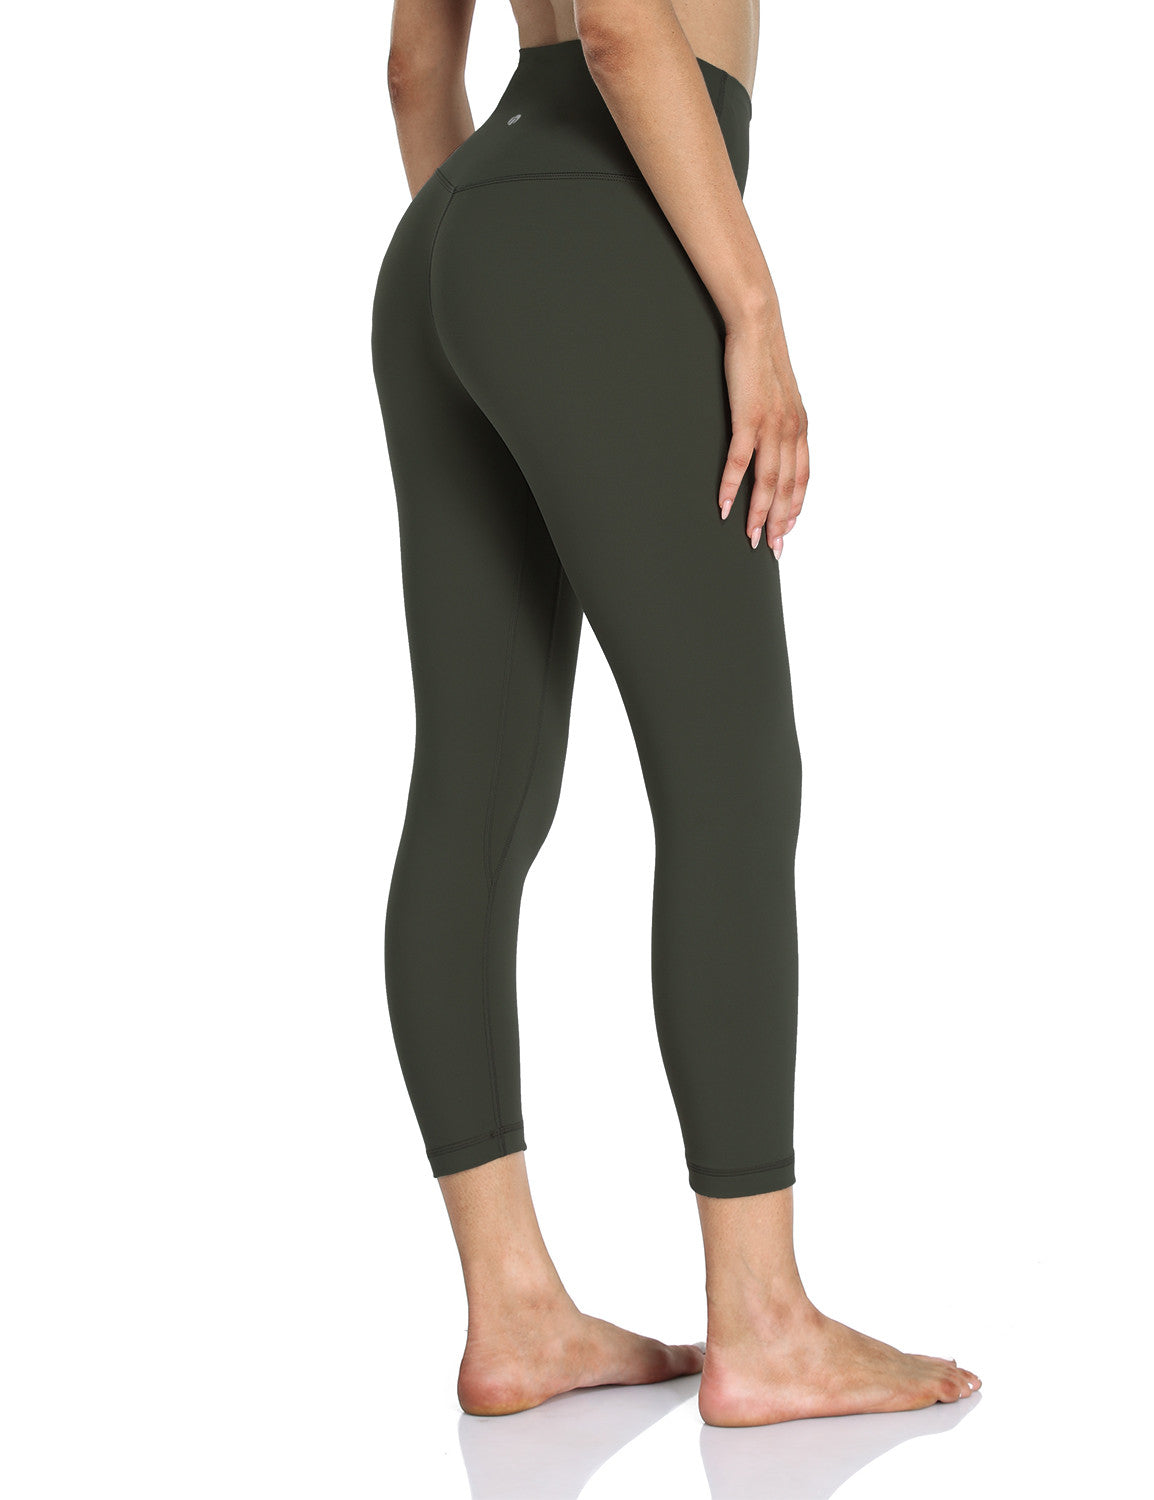 HeyNuts Hawthorn Athletic Essential II High Waisted Yoga Capris Leggings,  Workout Cropped Pants 21'', Camo Grey_21, Small